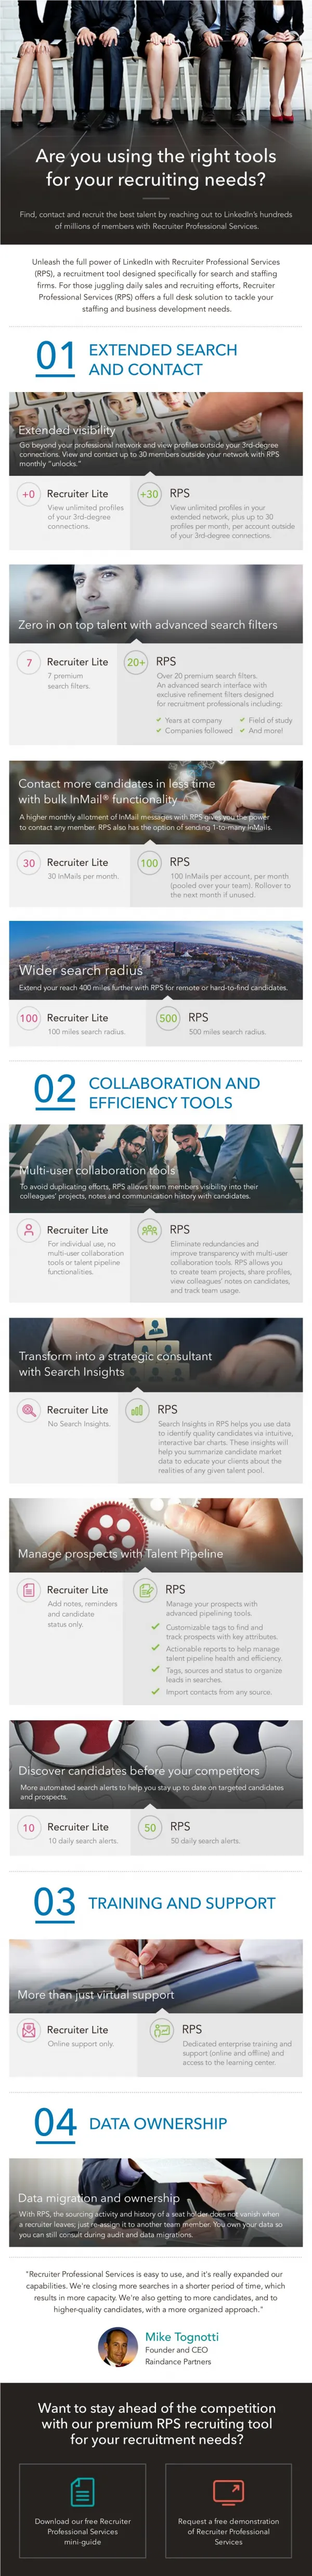 Are you using the right tools for your recruiting needs?